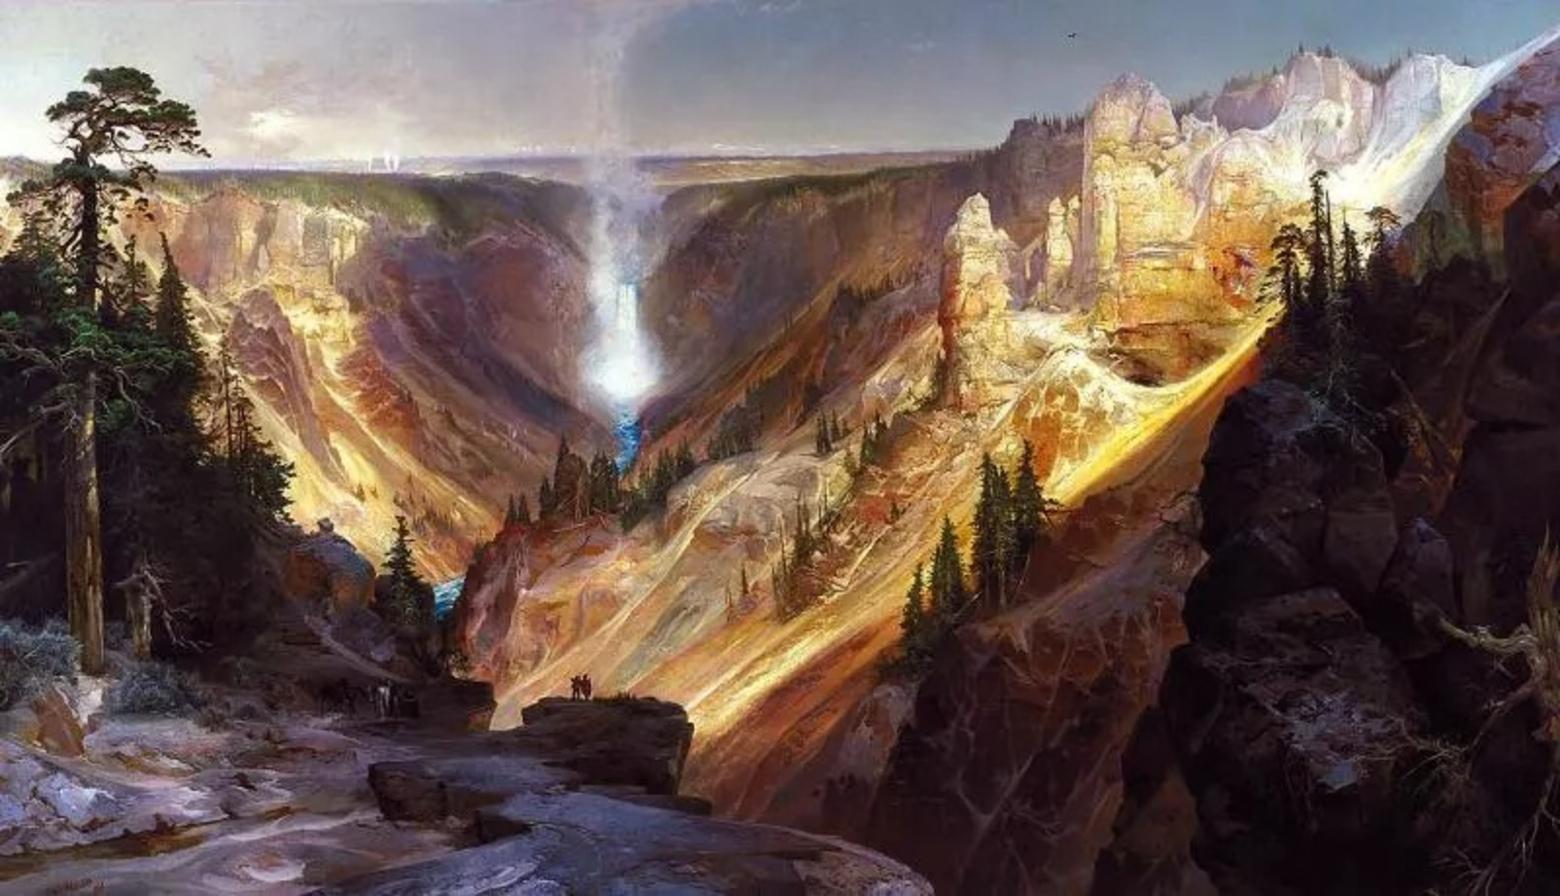 Thomas Moran's painting "Grand Canon of the Yellowstone" is considered a masterwork. Nelson thinks it contains racist symbolism, a contention Burritt says she doesn't prove. 